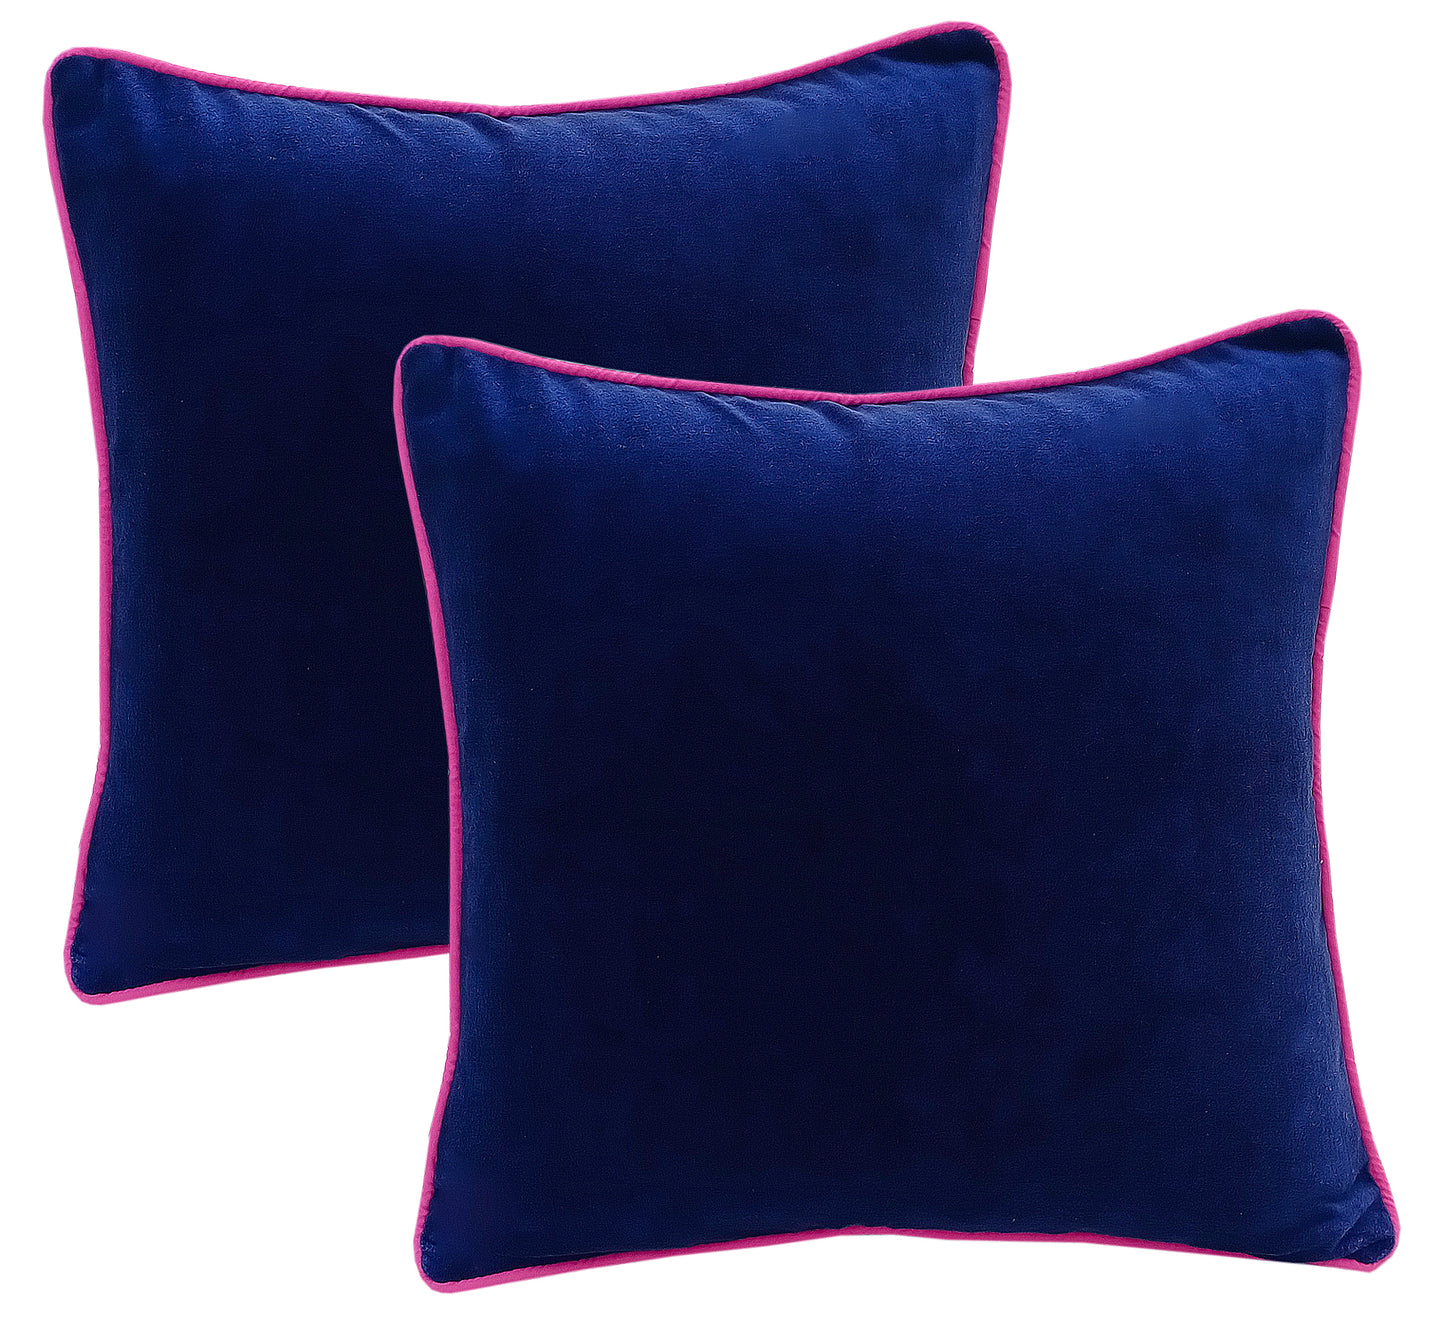 Blue Velvet Cushion Cover with pink piping - The Teal Thread